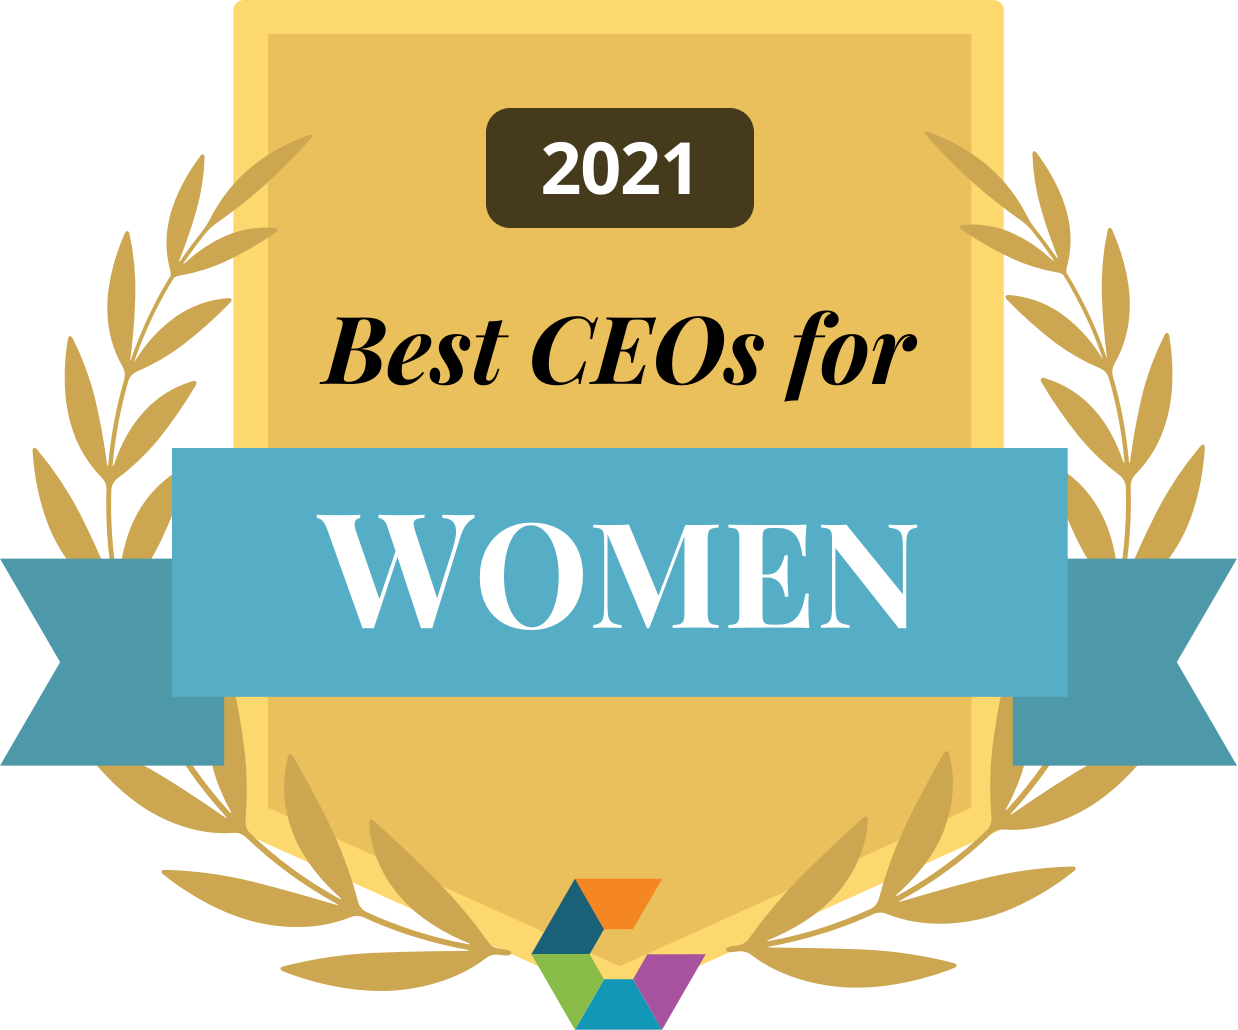 Comparably Best CEOs For Women 2021